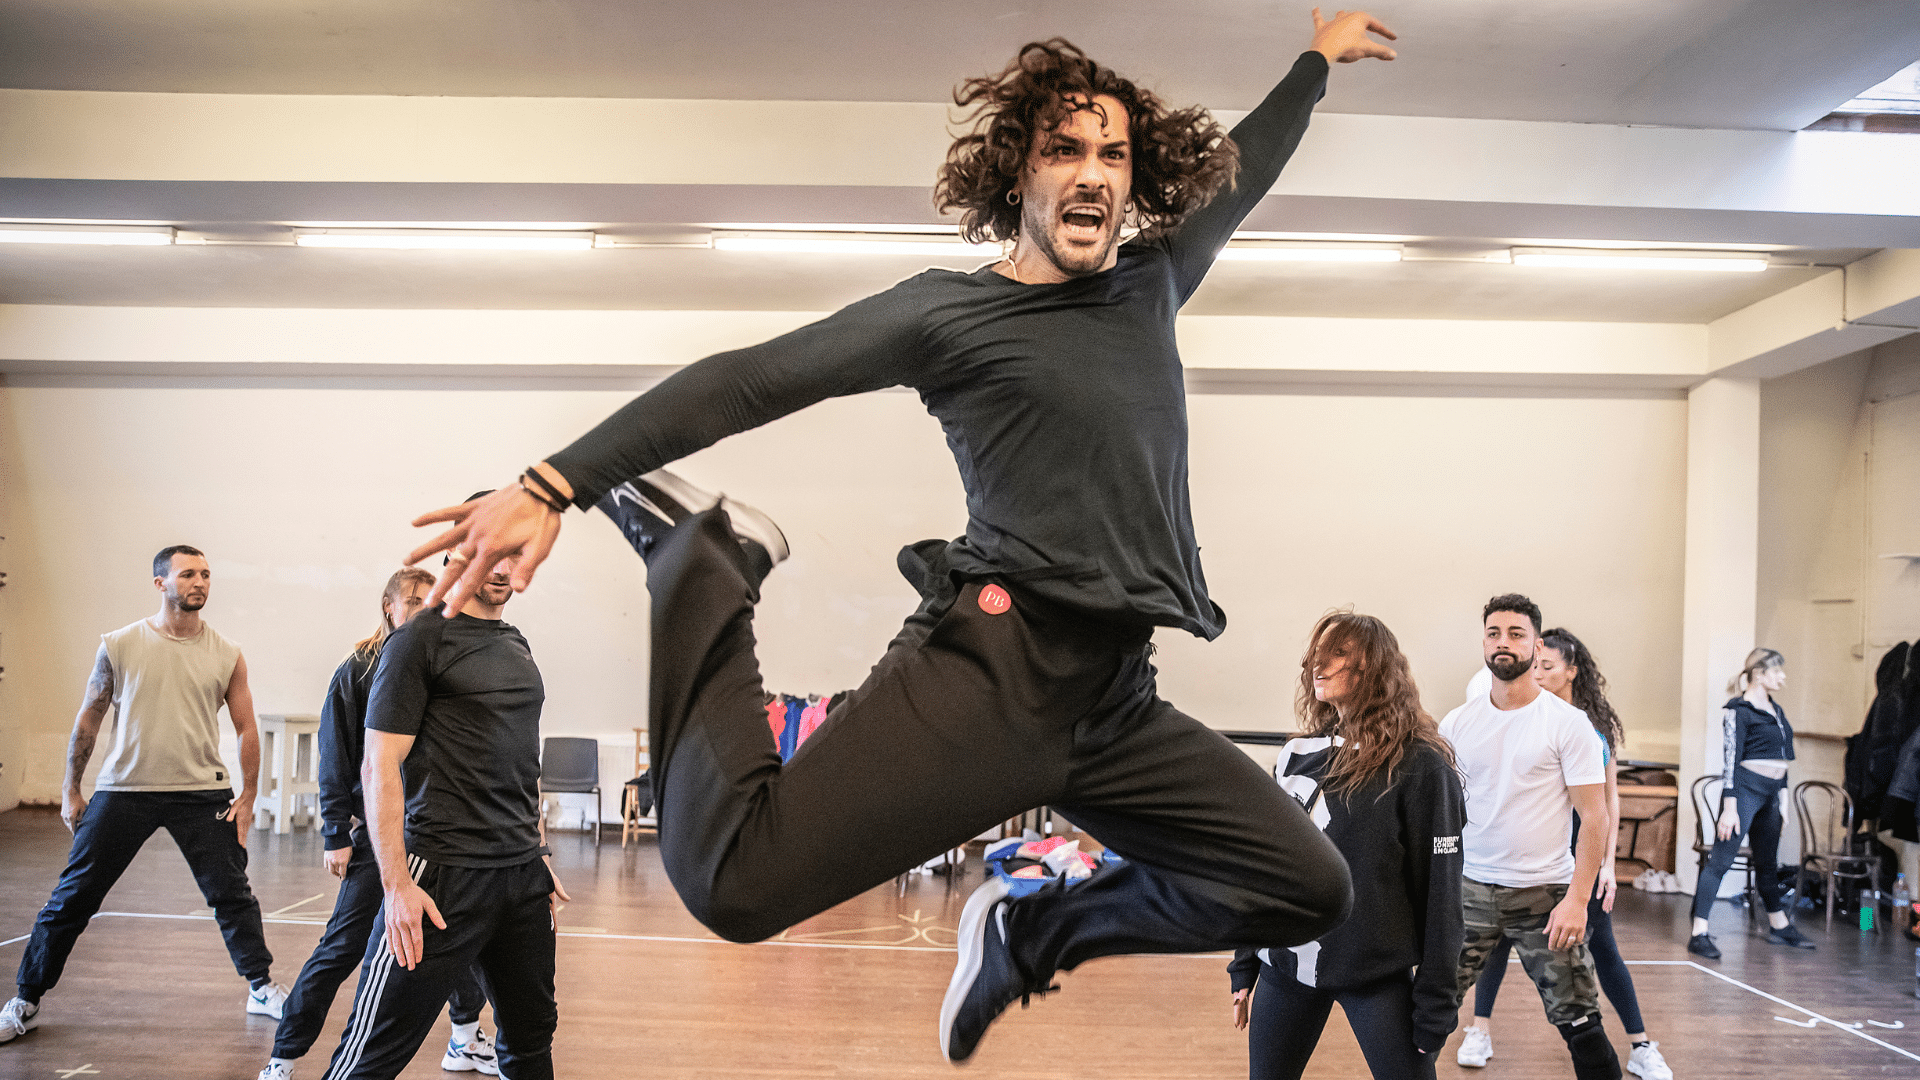 Rehearsal photo. Graziano Di Prima, dressed in all black, performs a balletic leap. His long curly hair is swishing with the movement, his face is contorted with intensity, his arms outspread and tensed. Other dancers look on from behind, apparently standing still.